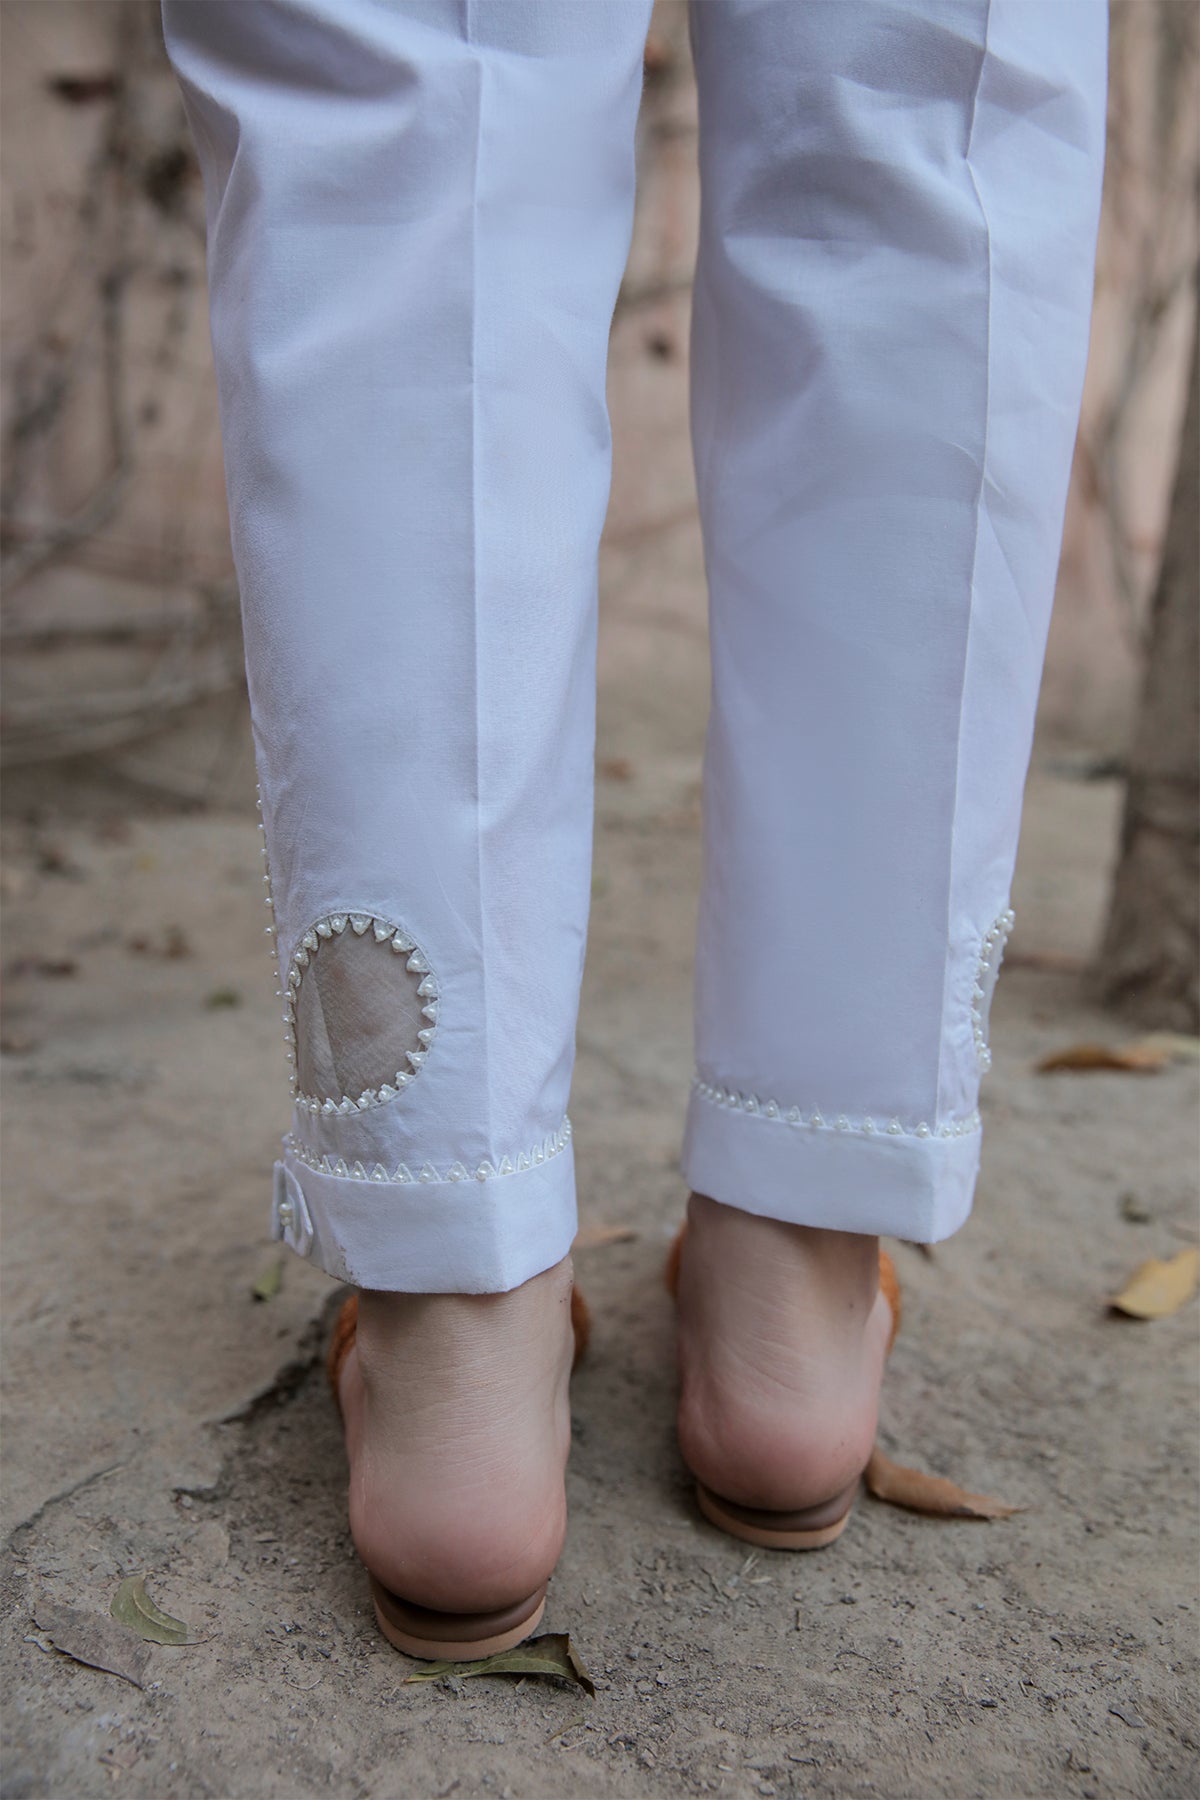 EMBROIDERED COTTON TROUSER 246